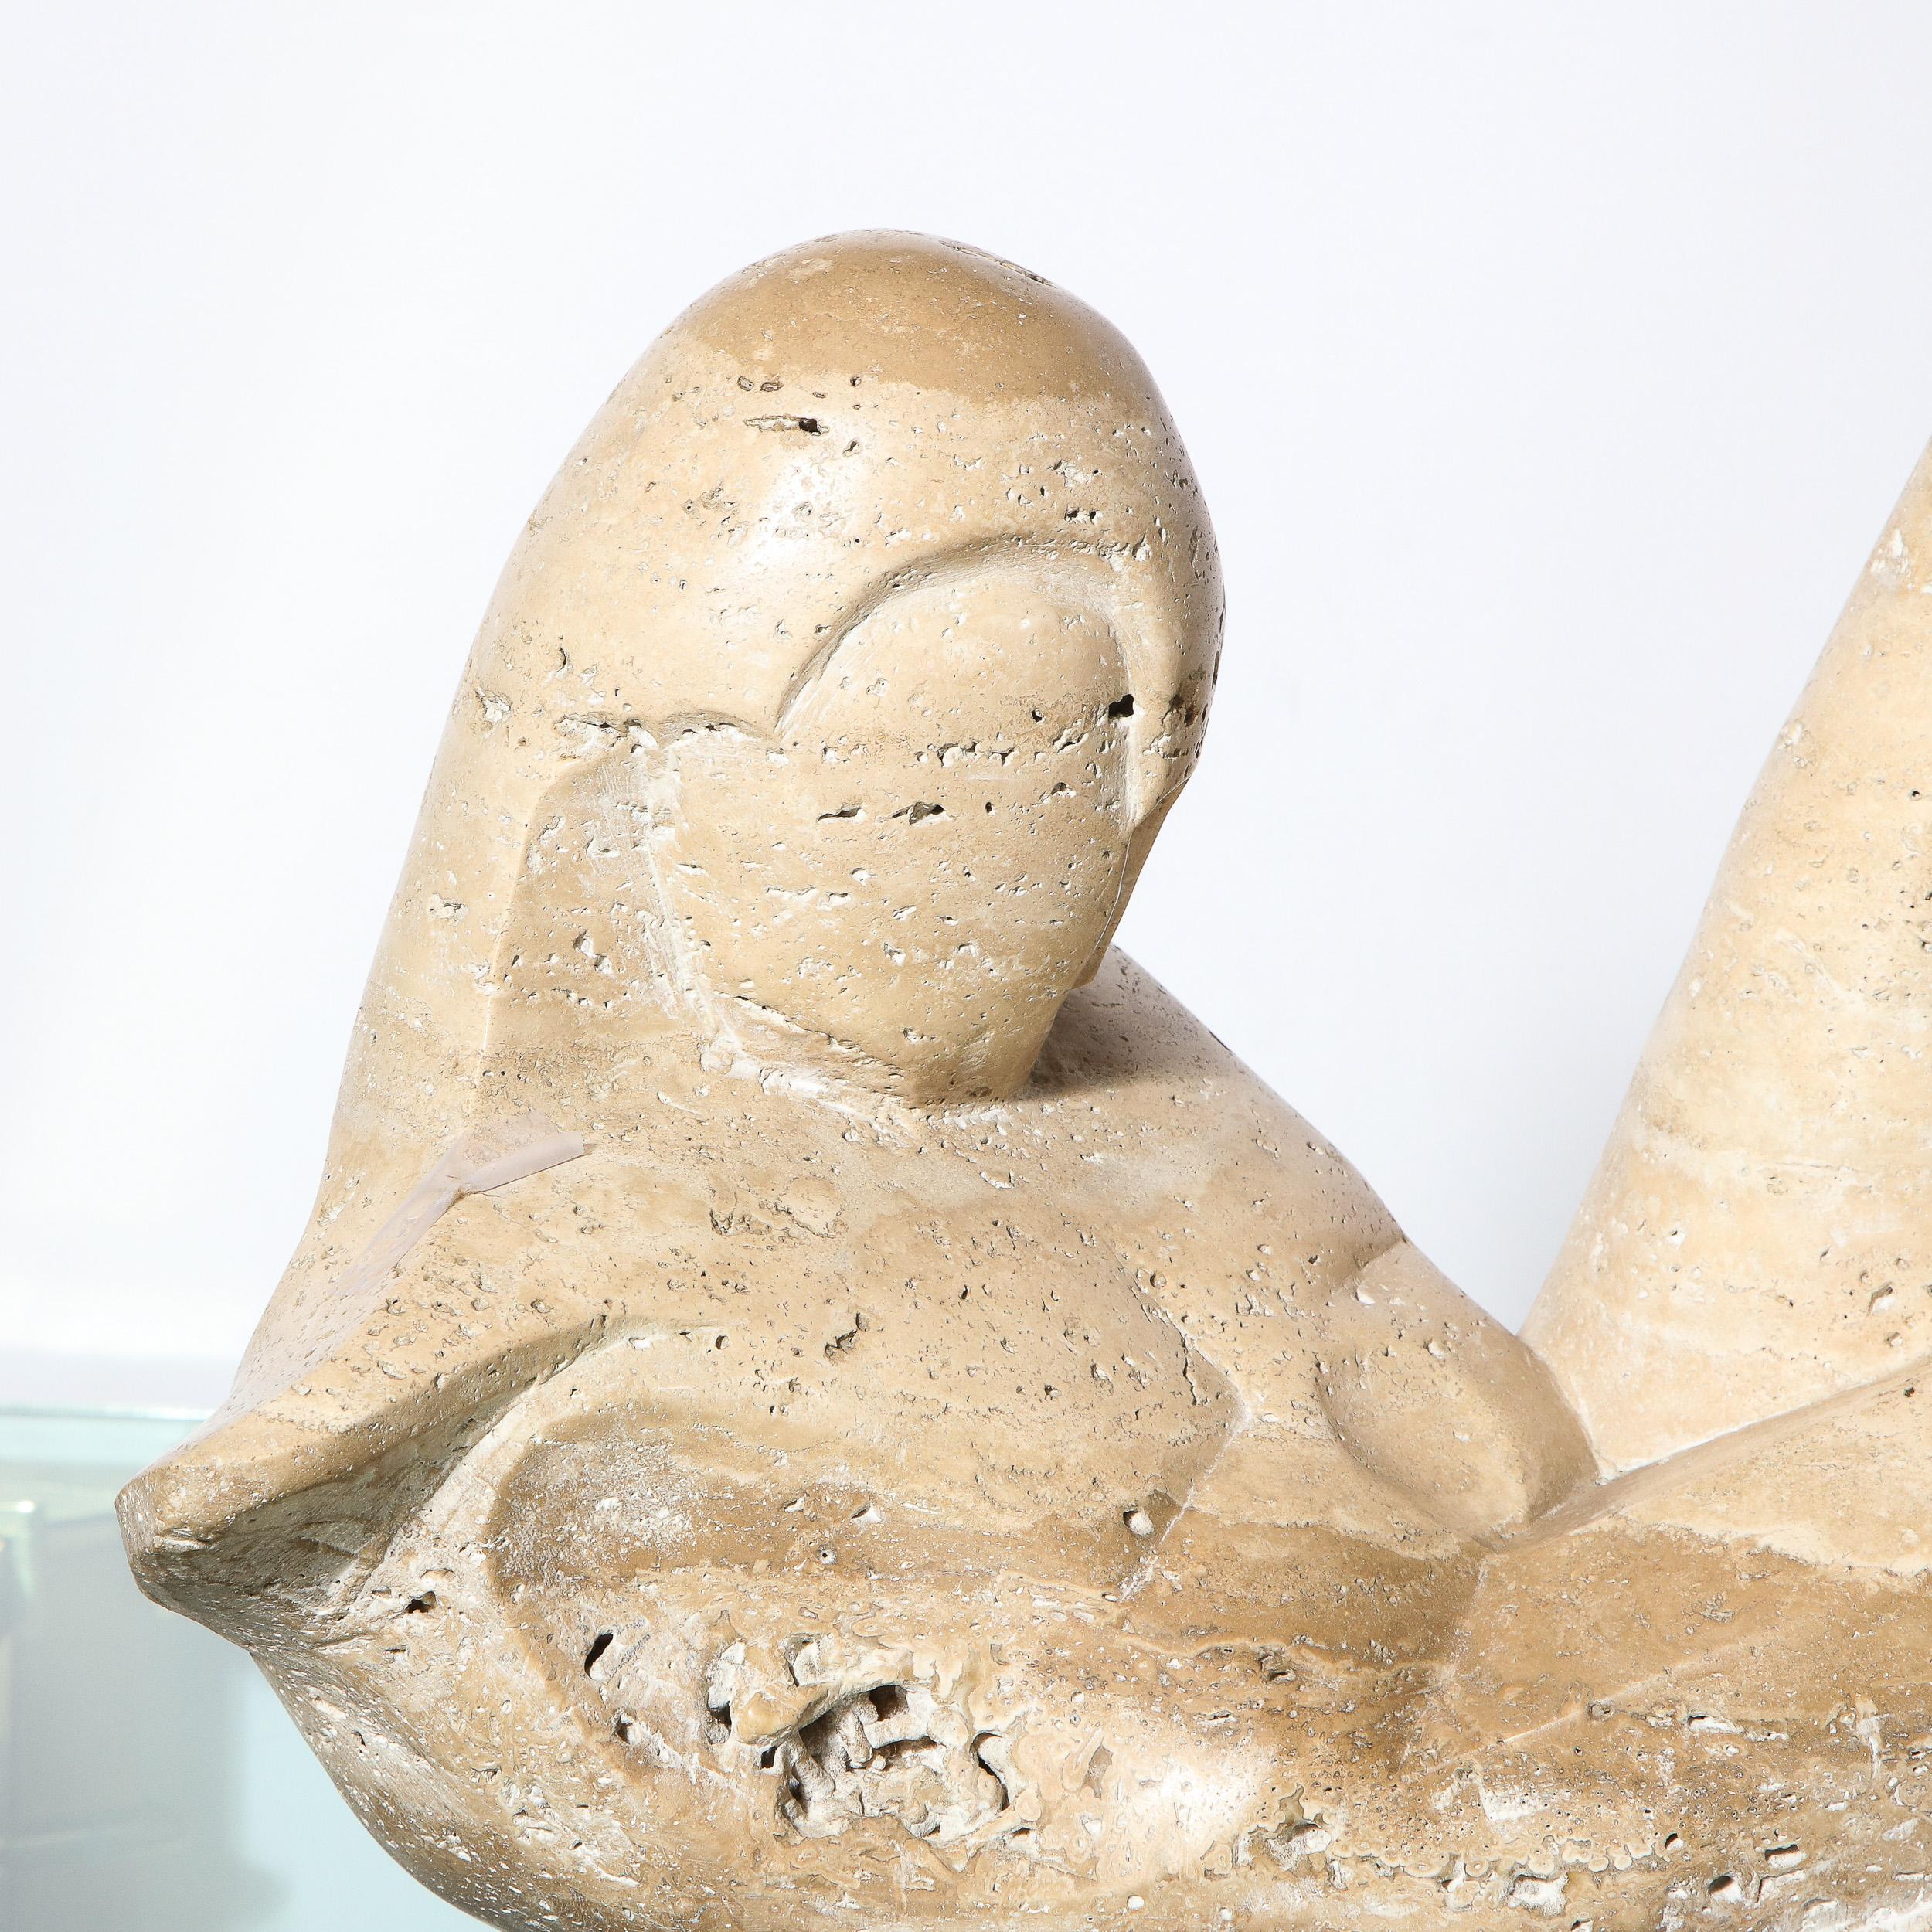 This elegant and sophisticated Mid-Century Modern sculpture was realized by the studio of Constantina Iconomopulos (and signed) in Argentina circa 1960. Realized from a single slab of travertine marble - offering a sublime assortment of subdued